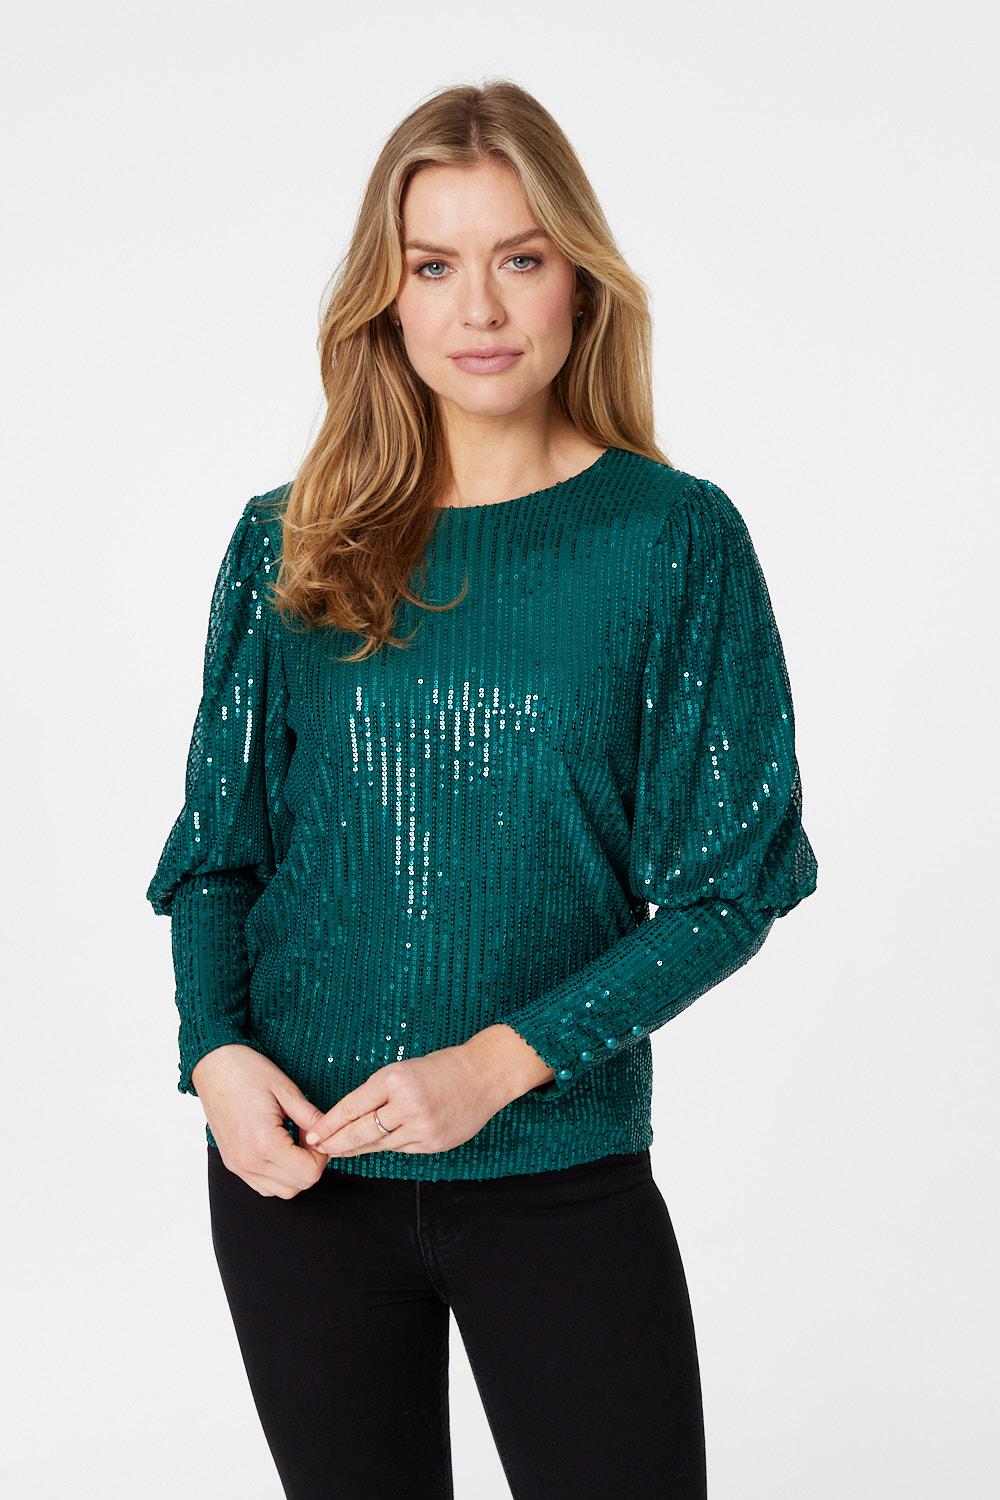 Green | Sequinned Long Puff Sleeve Top : Model is 5'10"/178 cm and wears UK8/EU36/US4/AUS8